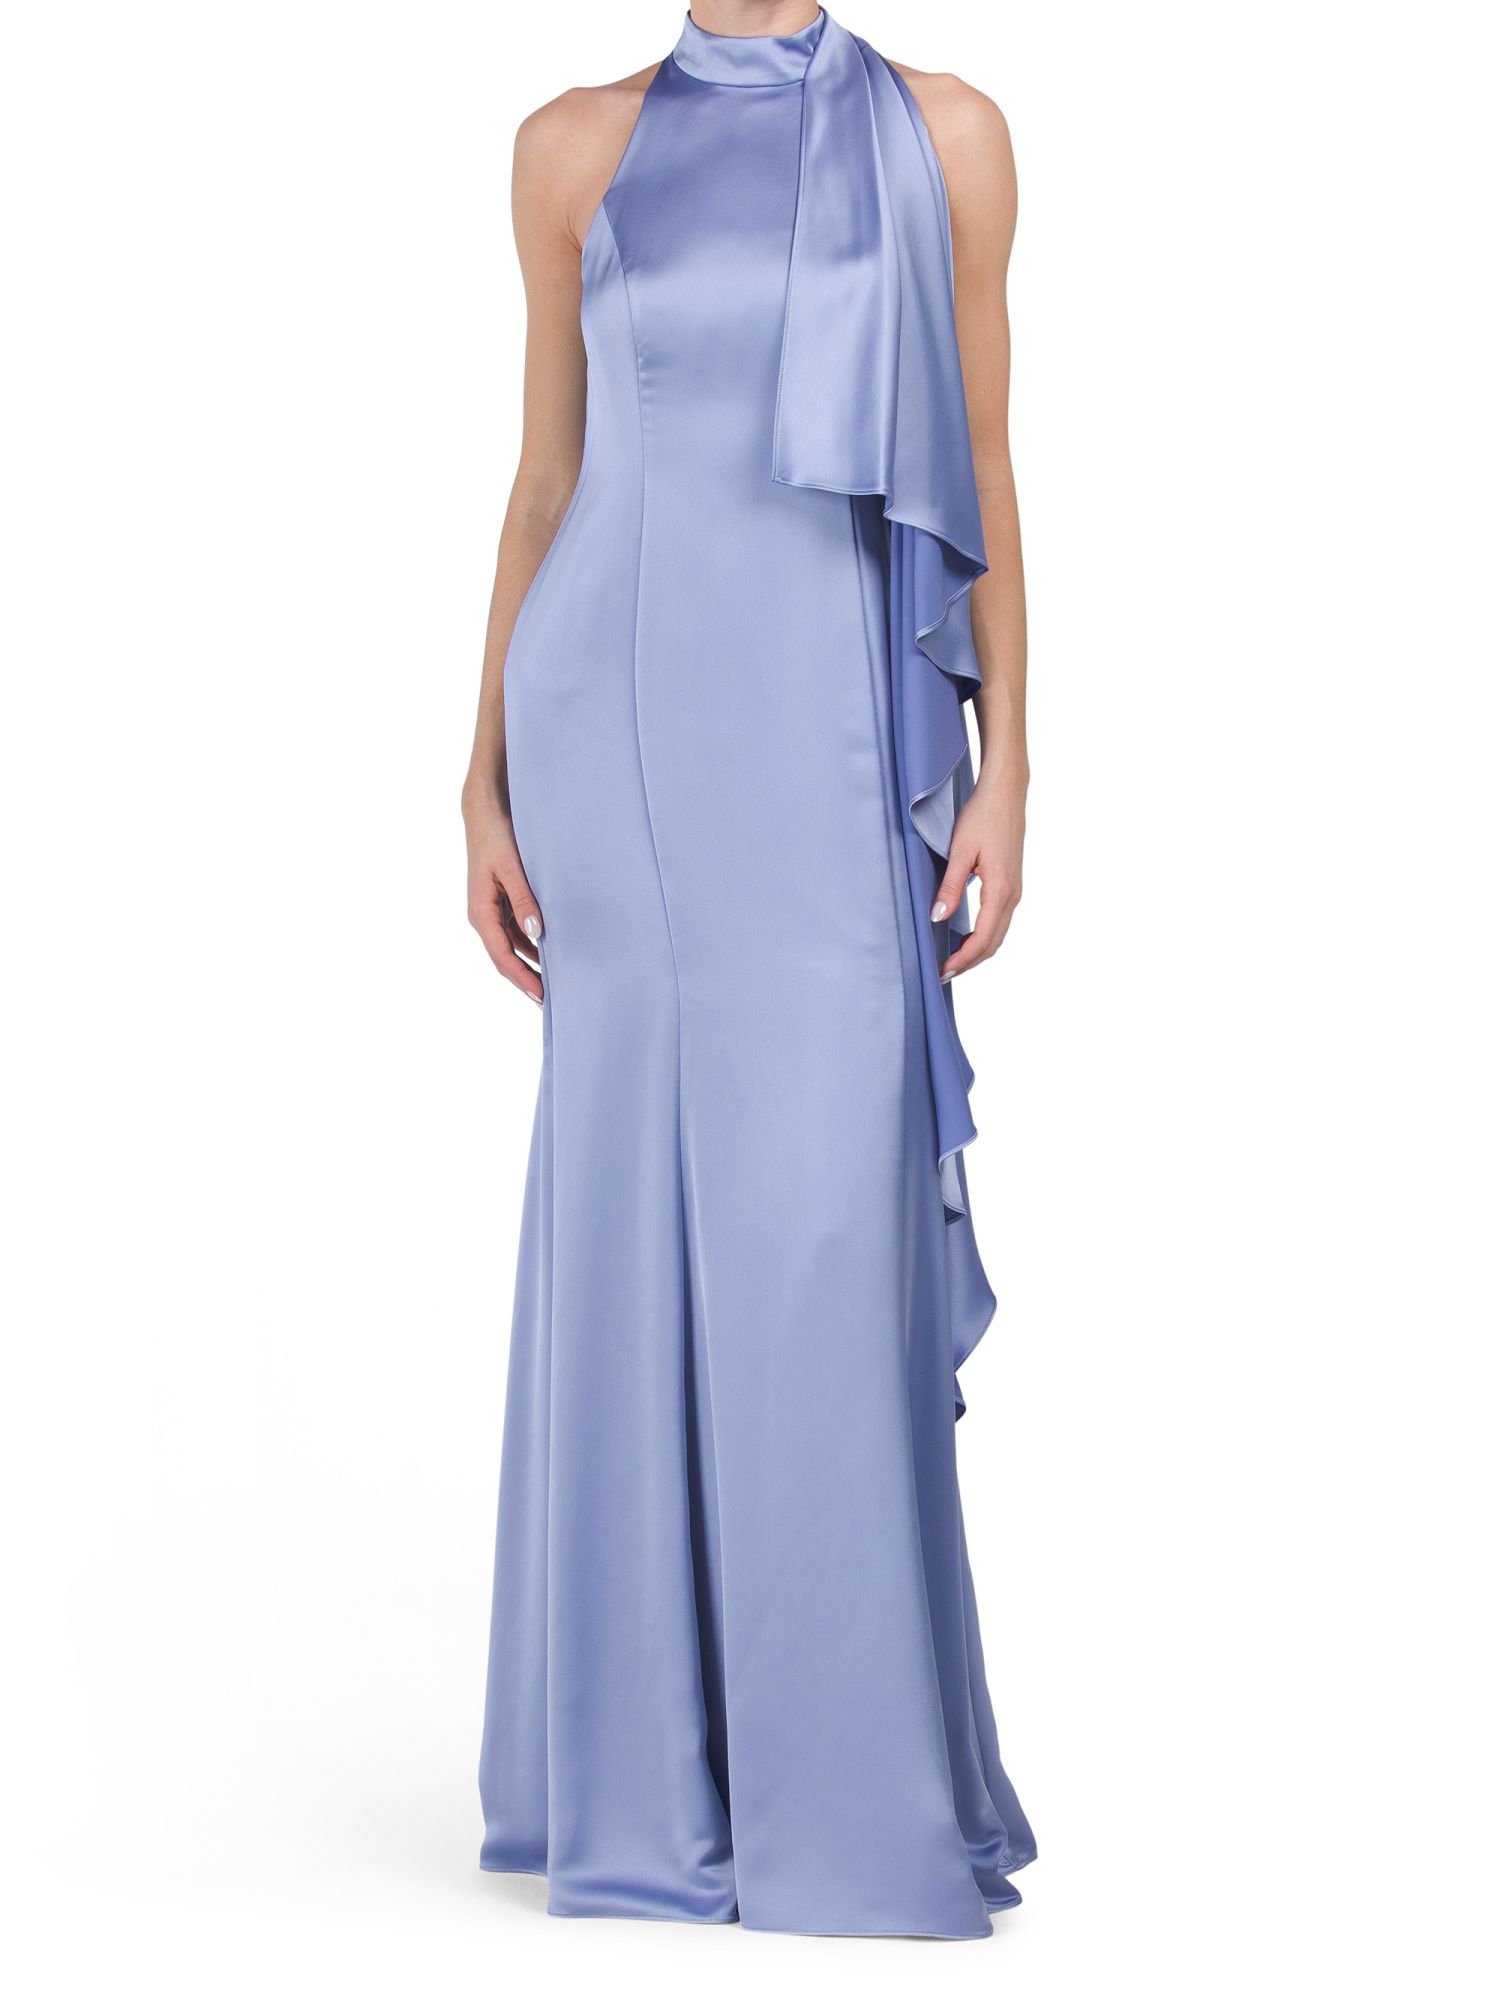 Halter Neck Gown With Ruffle Detail | Formal Dresses | Marshalls | Marshalls